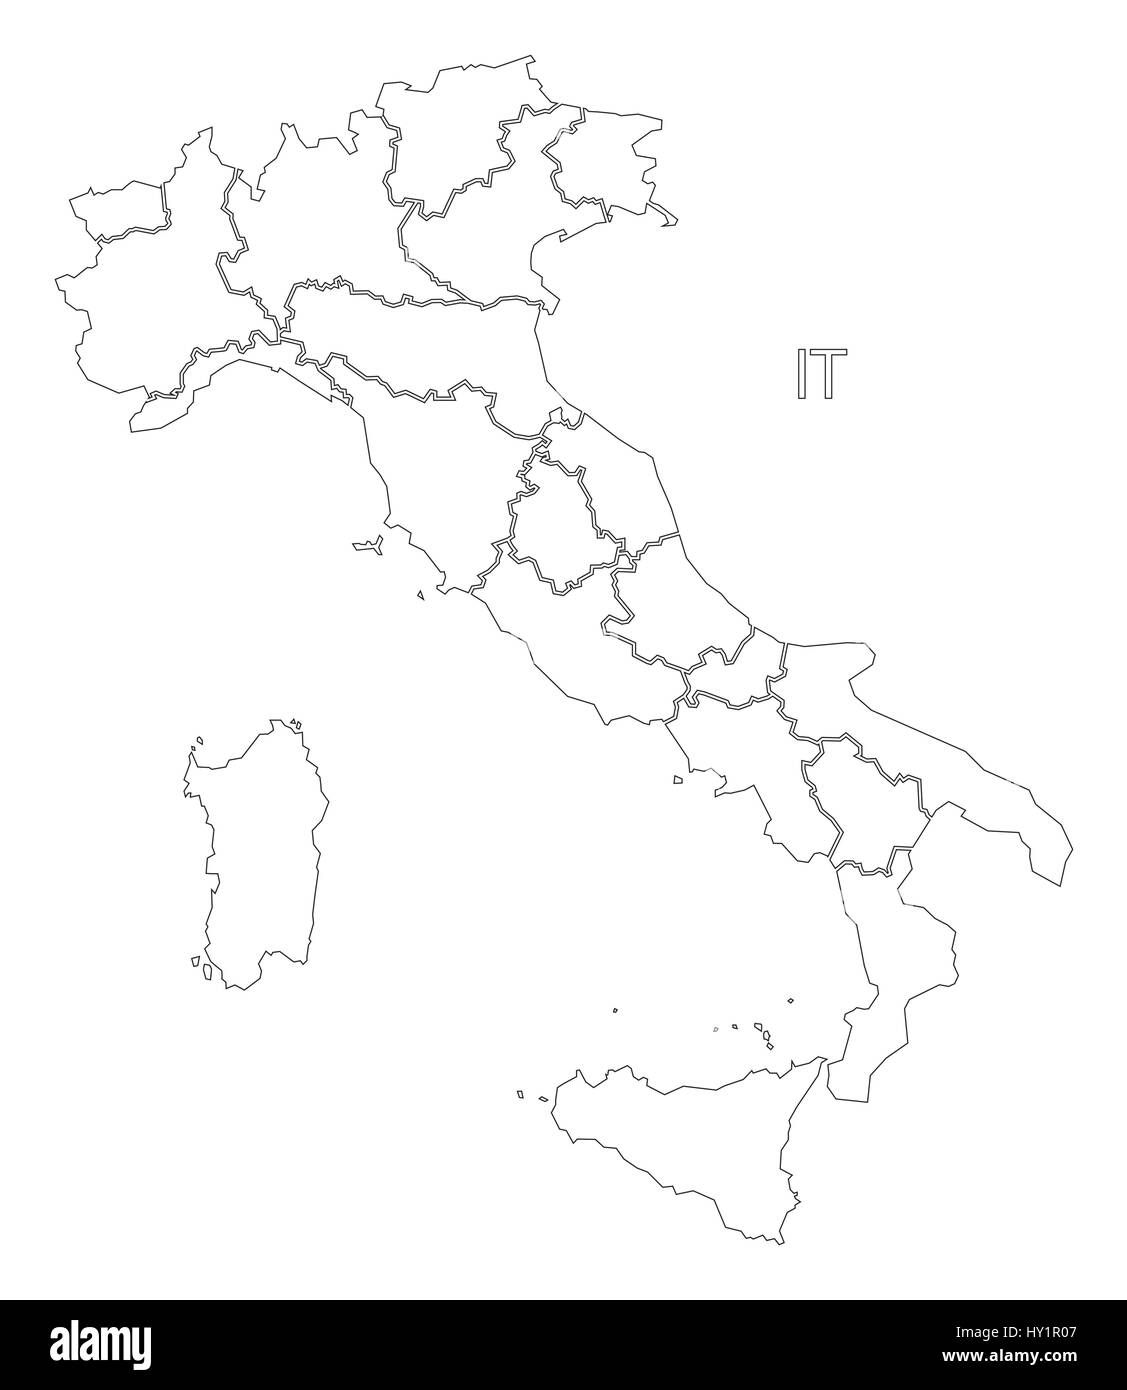 Italy outline silhouette map illustration with regions Stock Vector